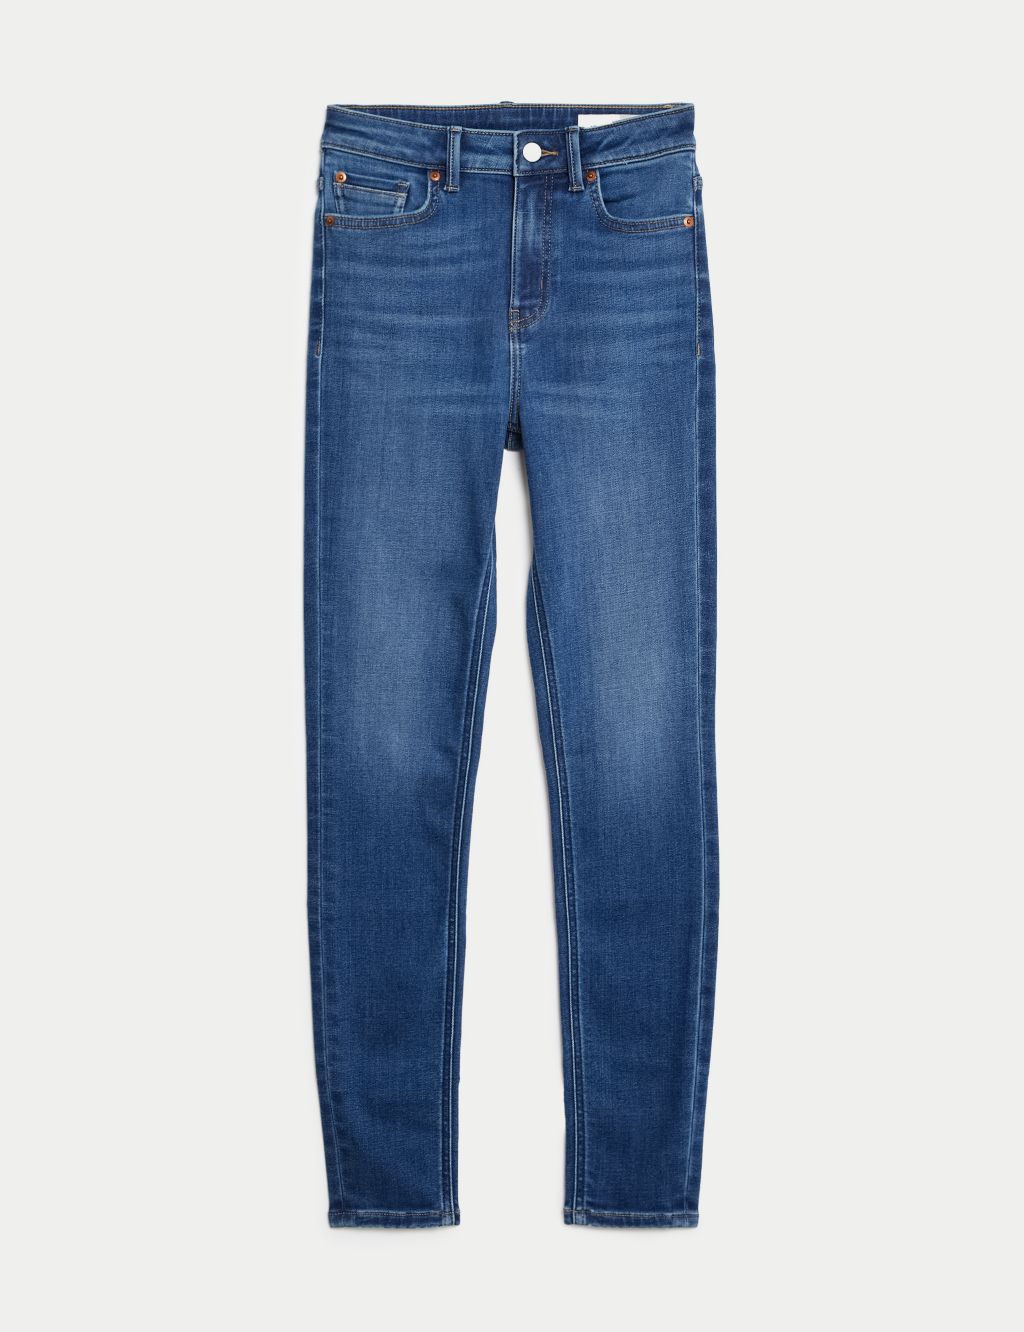 Ivy Thermal High Waisted Skinny Jeans image 2